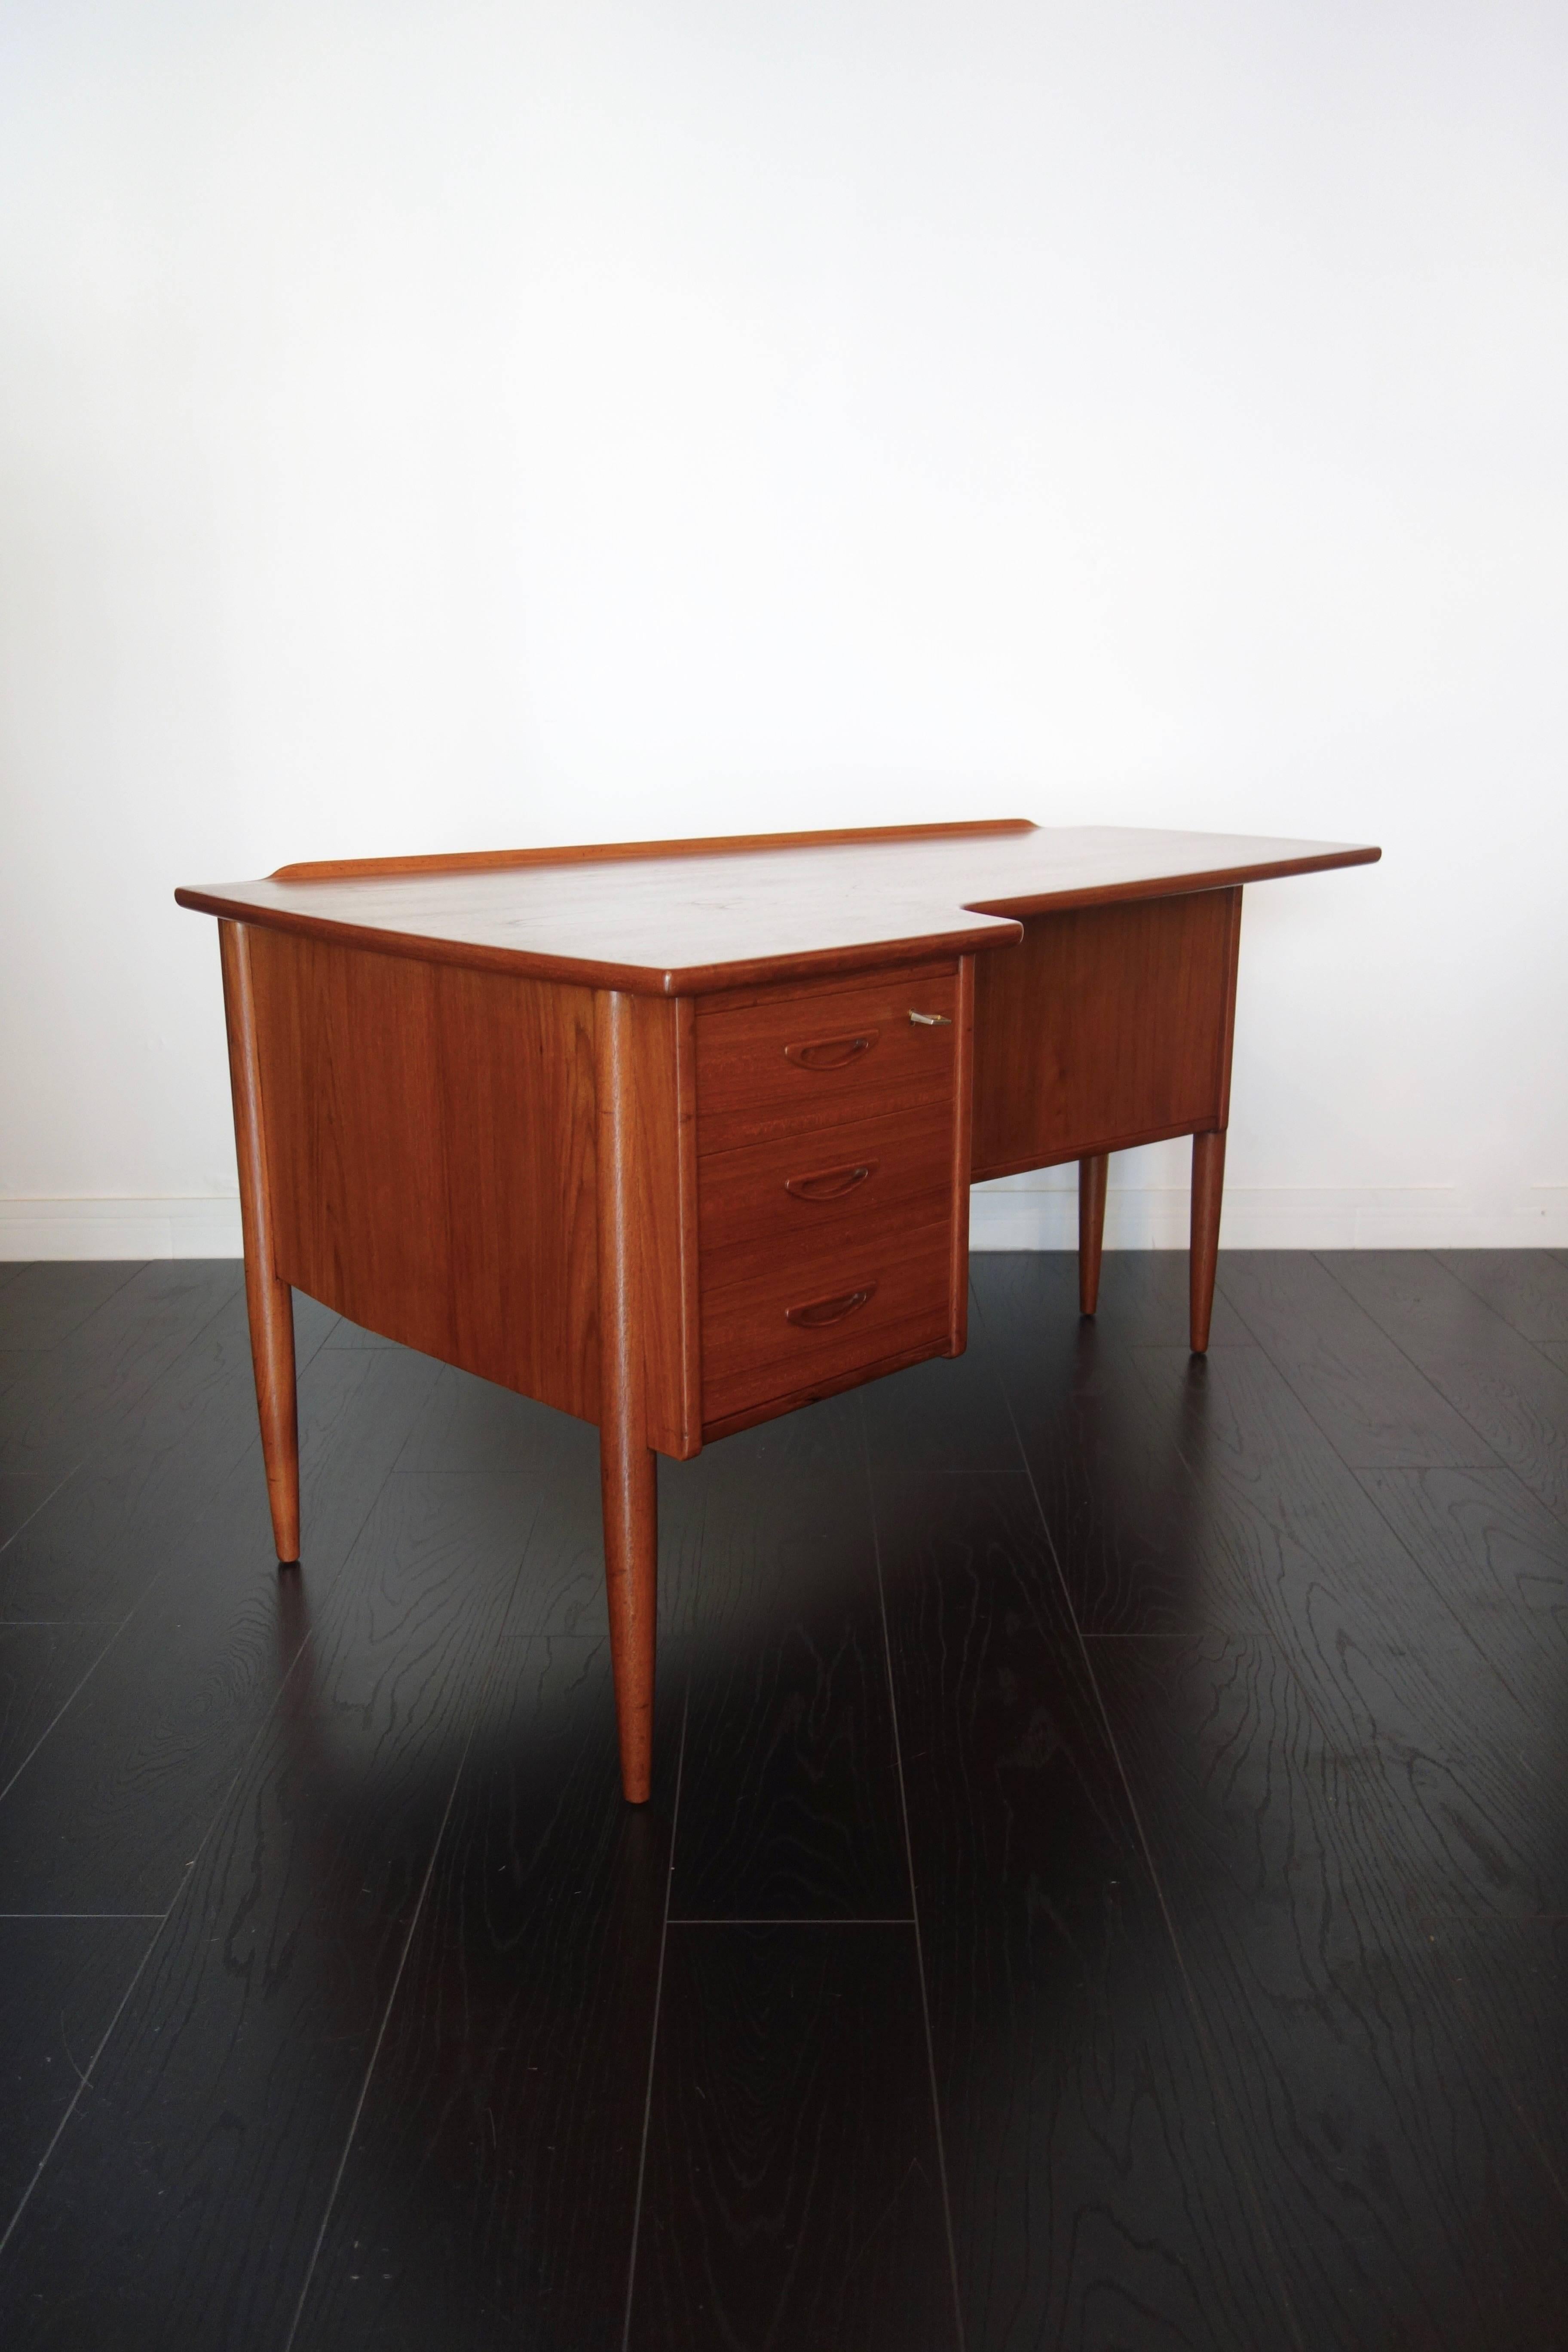 Double teak desk by Peter Løvig Nielsen. Made in the 1960s Danish. Boomerang shape, tapered round legs, three drawers with inlaid handles, recess and cupboard at the back with removable shelf. Keys and locks of origin. In exceptional condition: